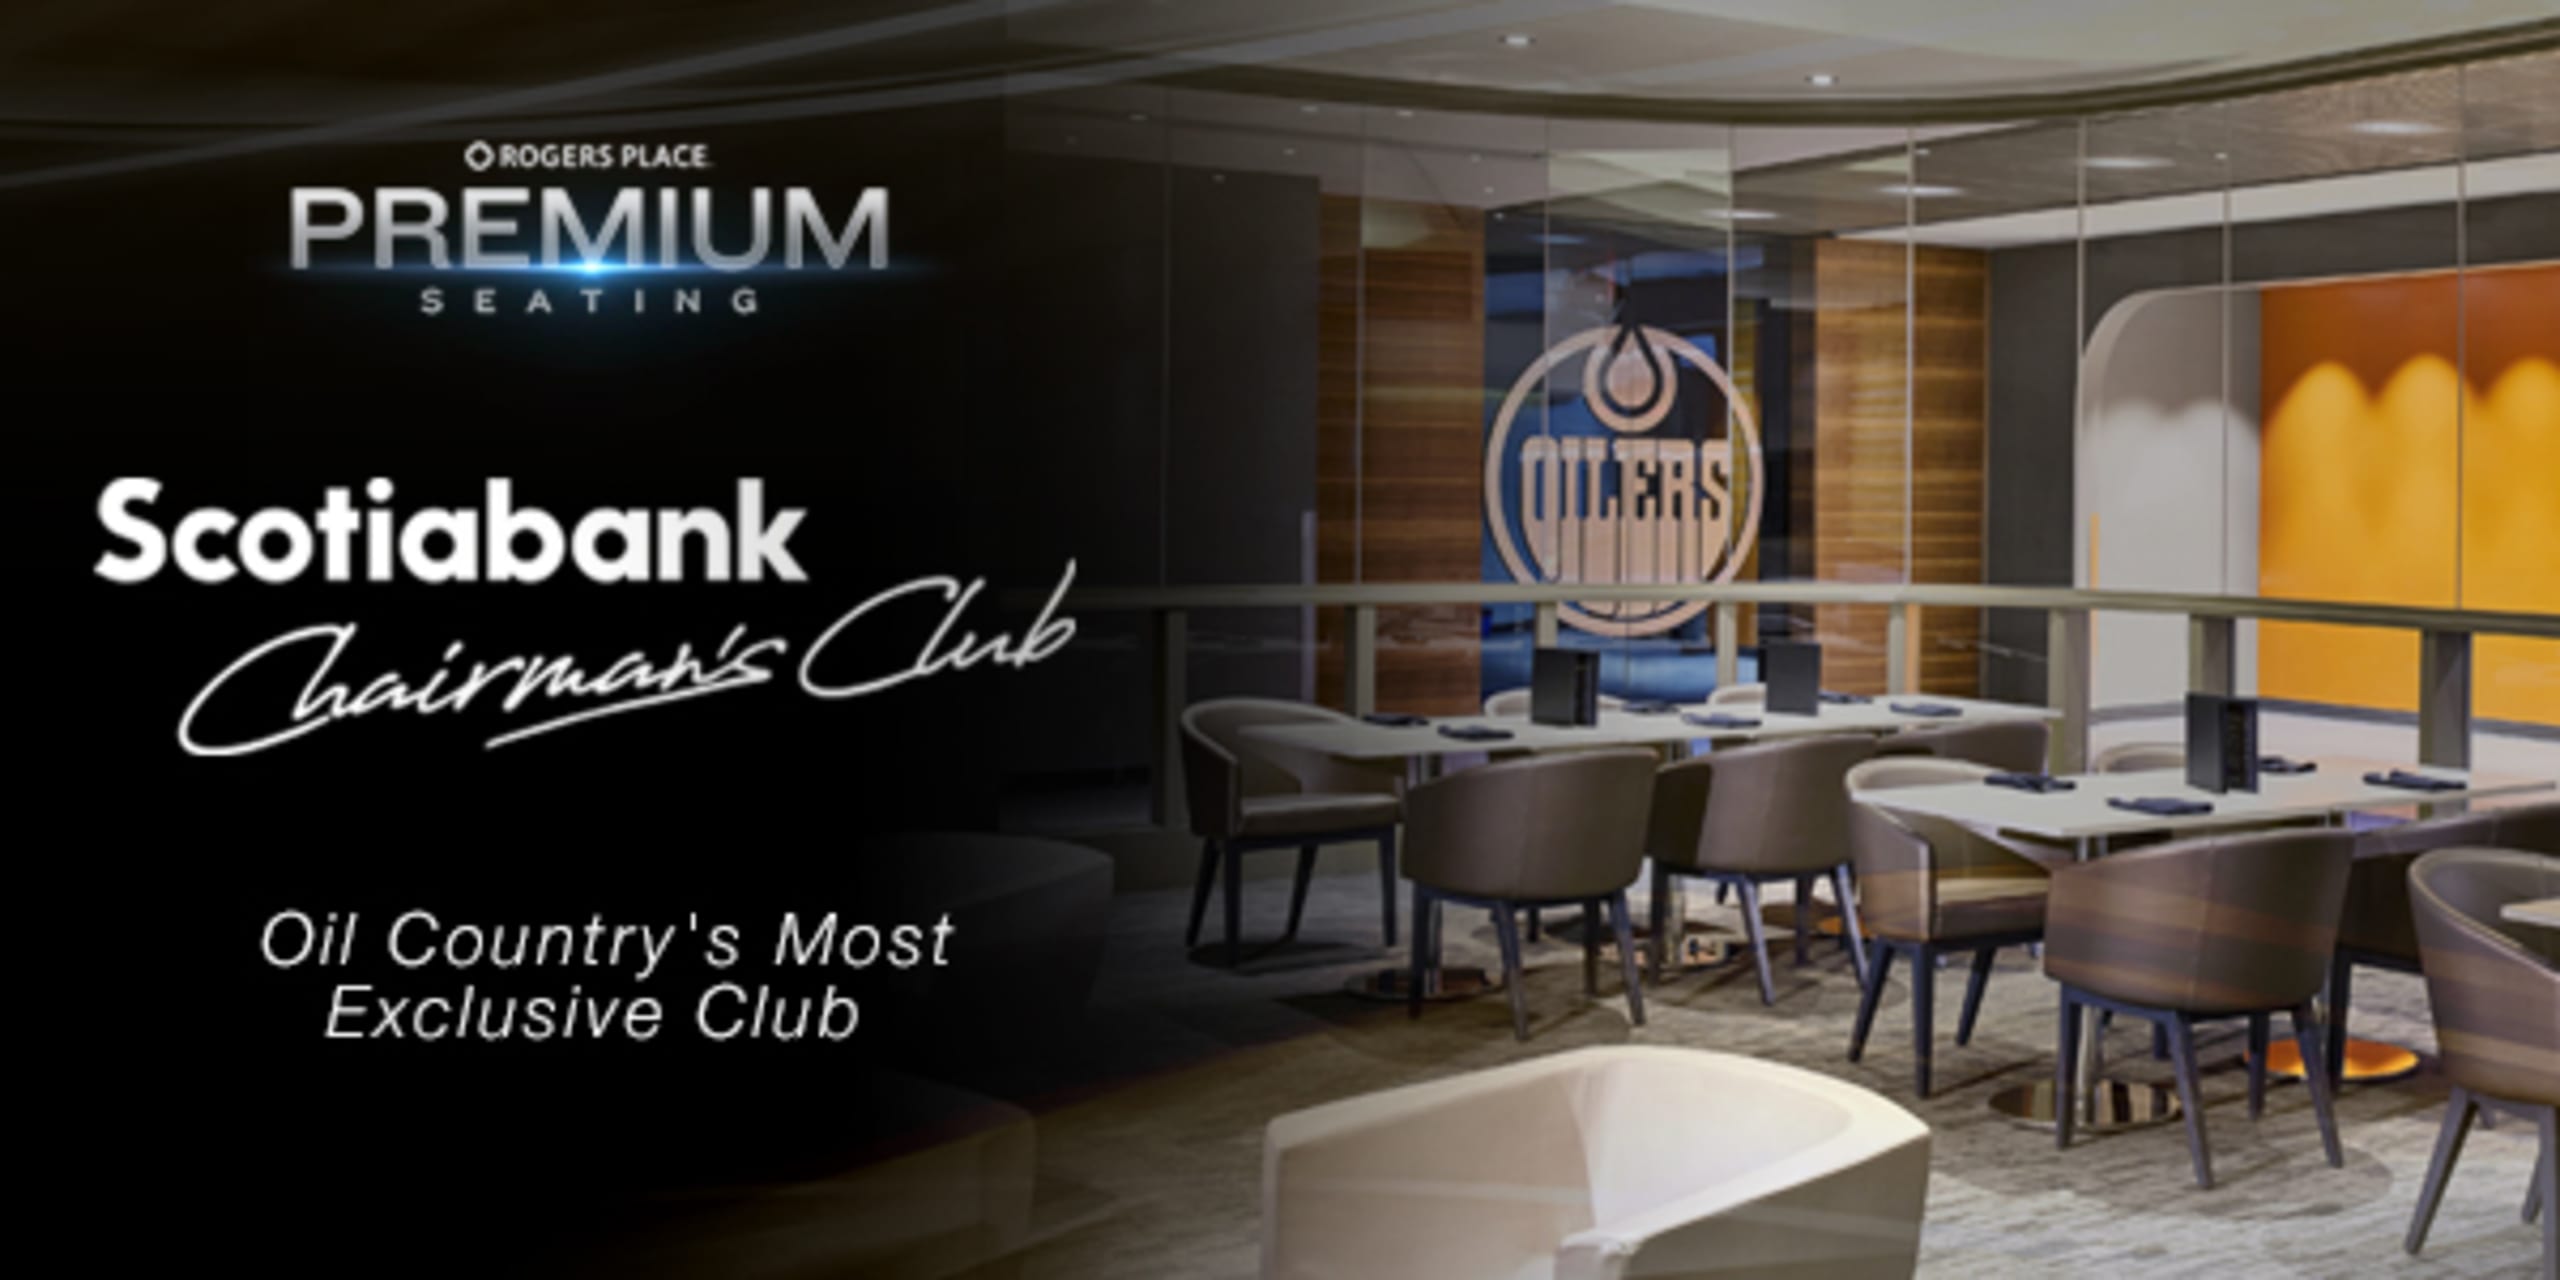 Scotiabank Chairman's Club - Oil Country's Most Exclusive Club